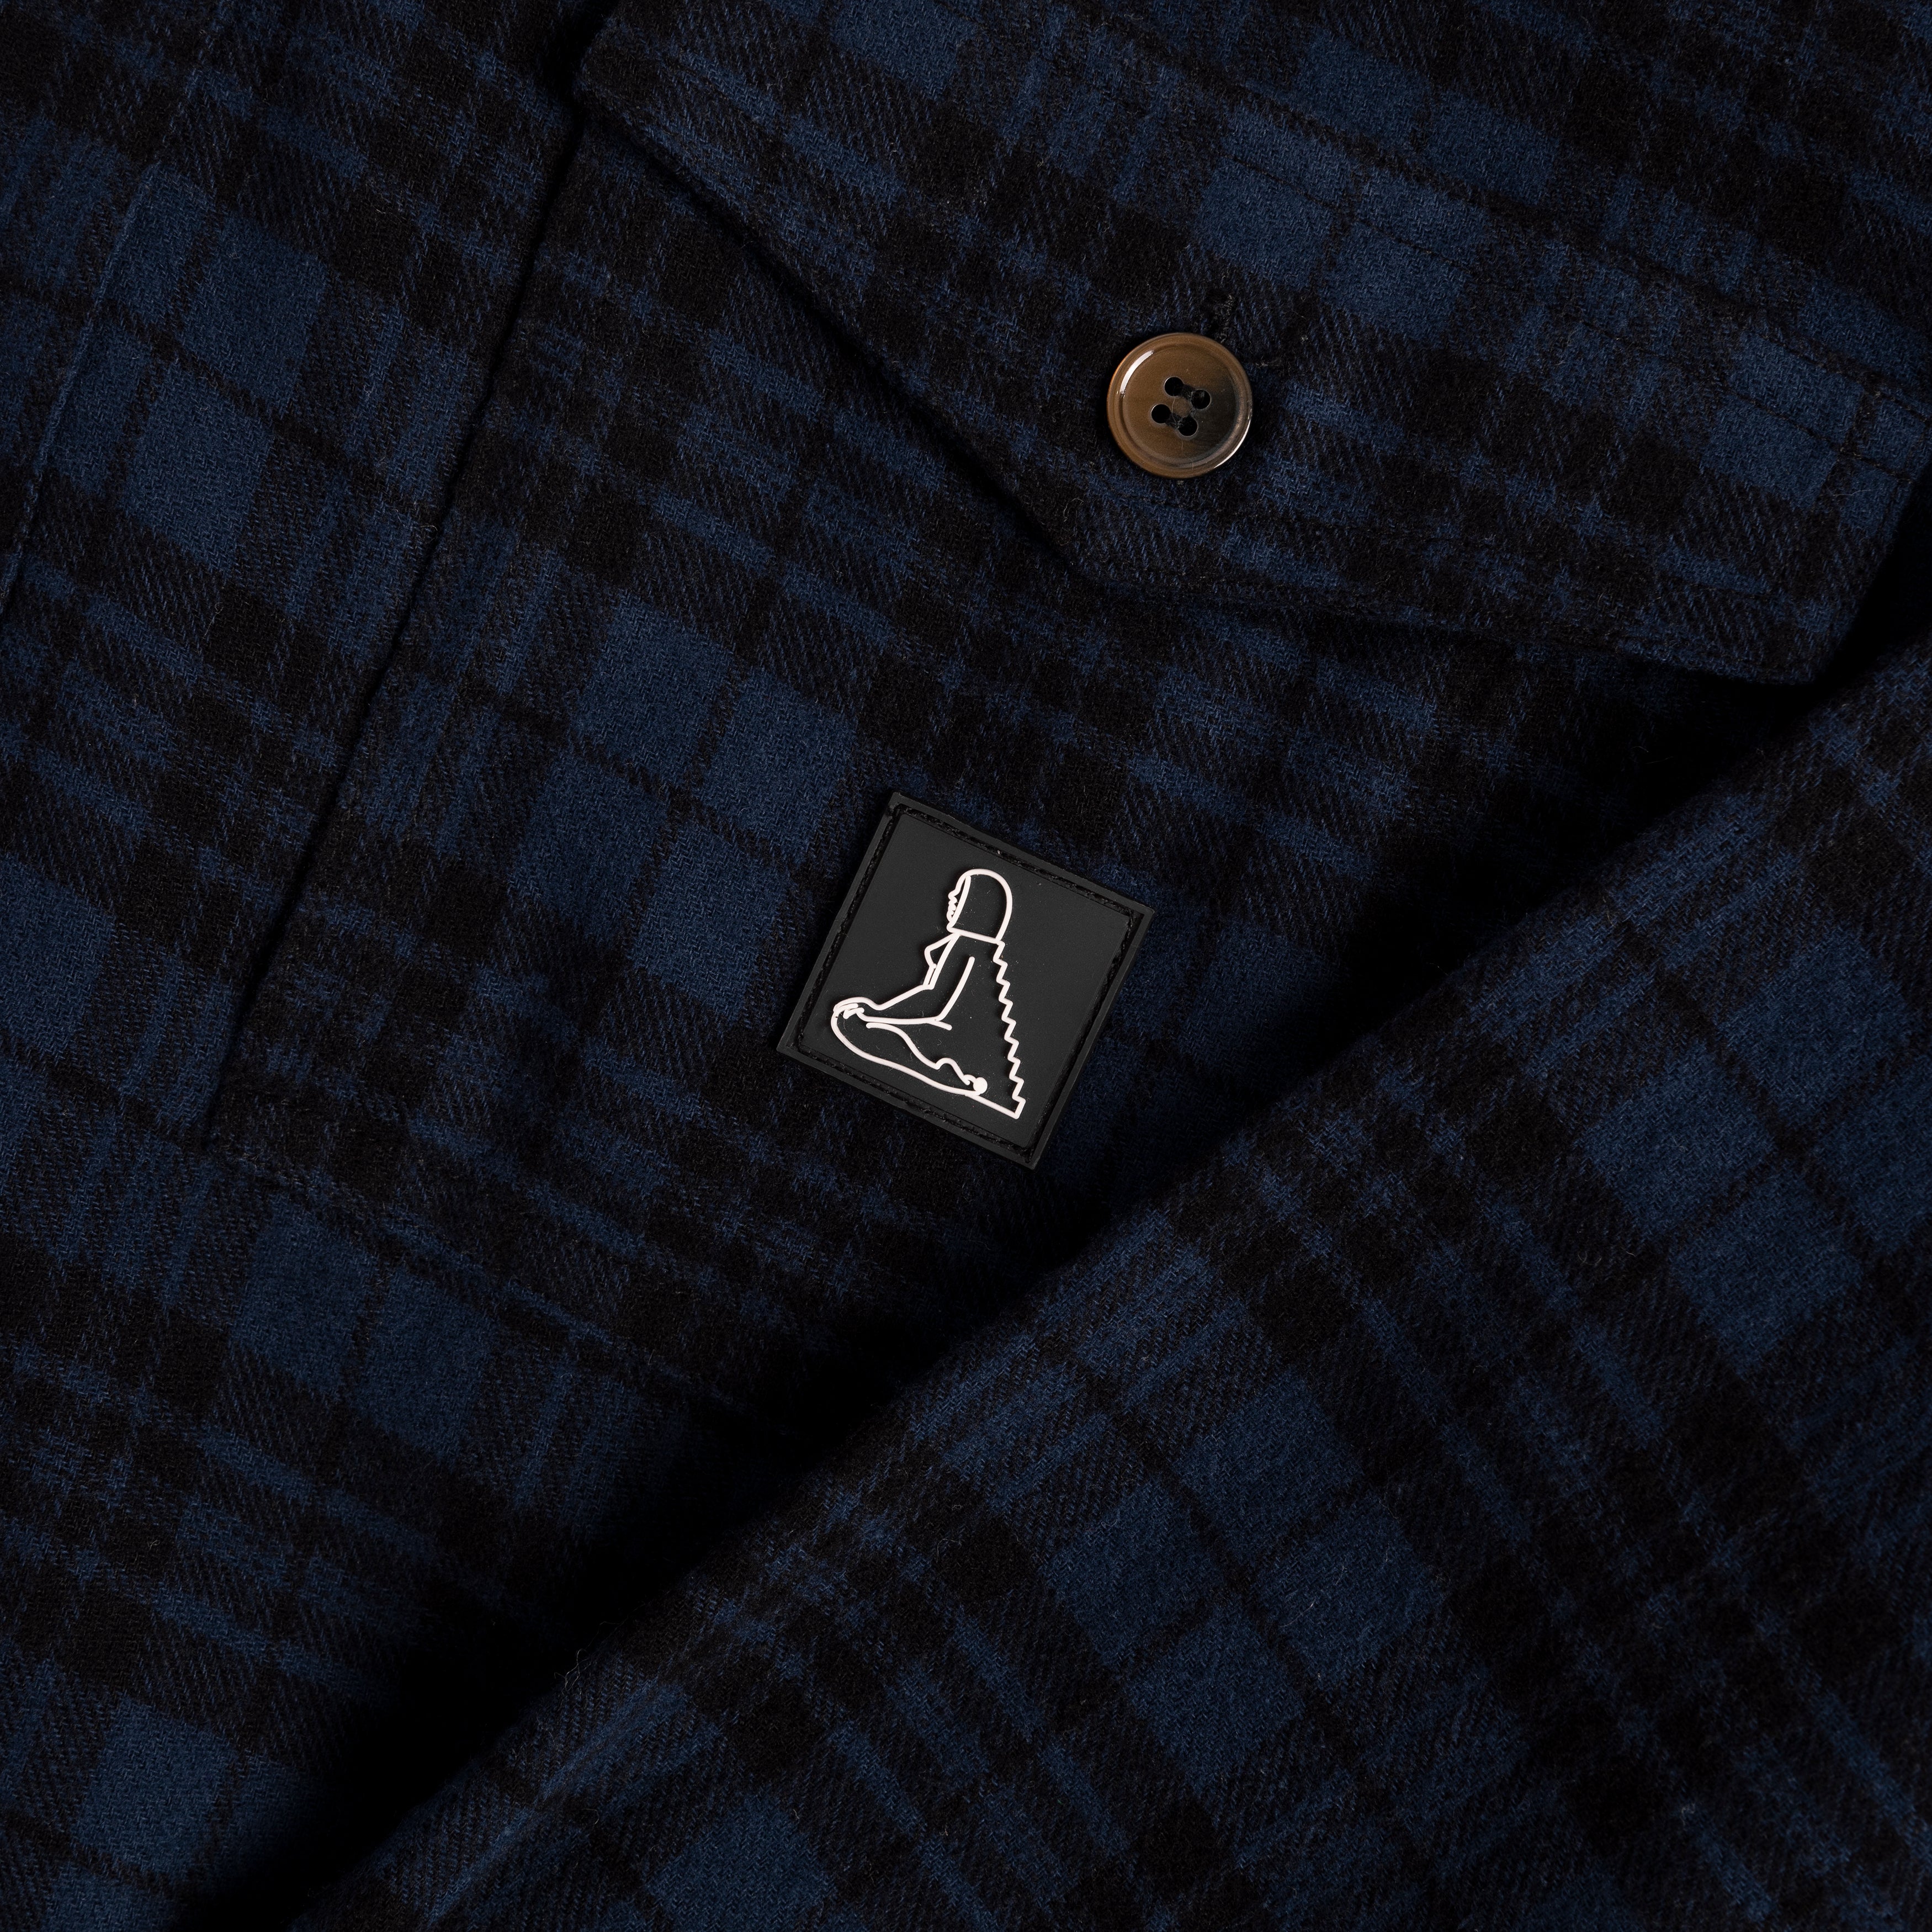 Leisure flannel check shirt - Navy